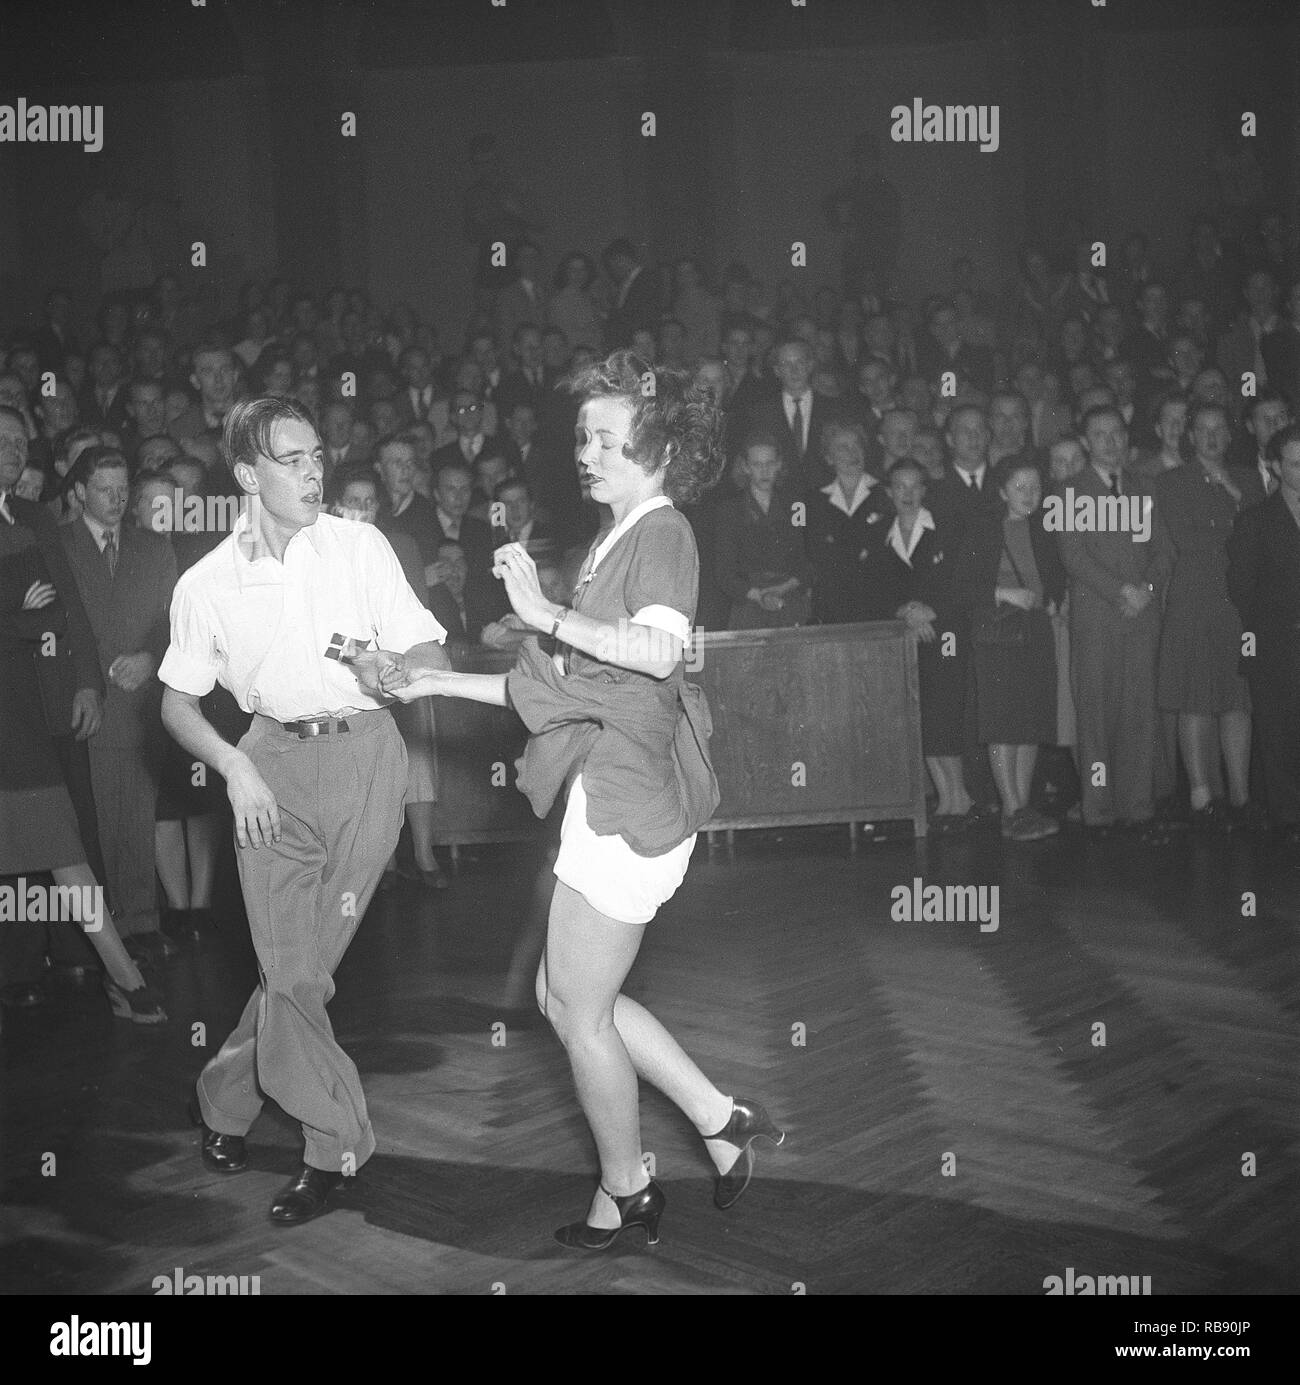 Jitterbug dance. A dance popularized in the United states and spread by American soldiers and sailors around the world during the Second world war. Pictured here a young couple when dancing the Jitterbug dance 1948 during a competition dance event. Photo: Kristoffersson ref AM61-2 Stock Photo